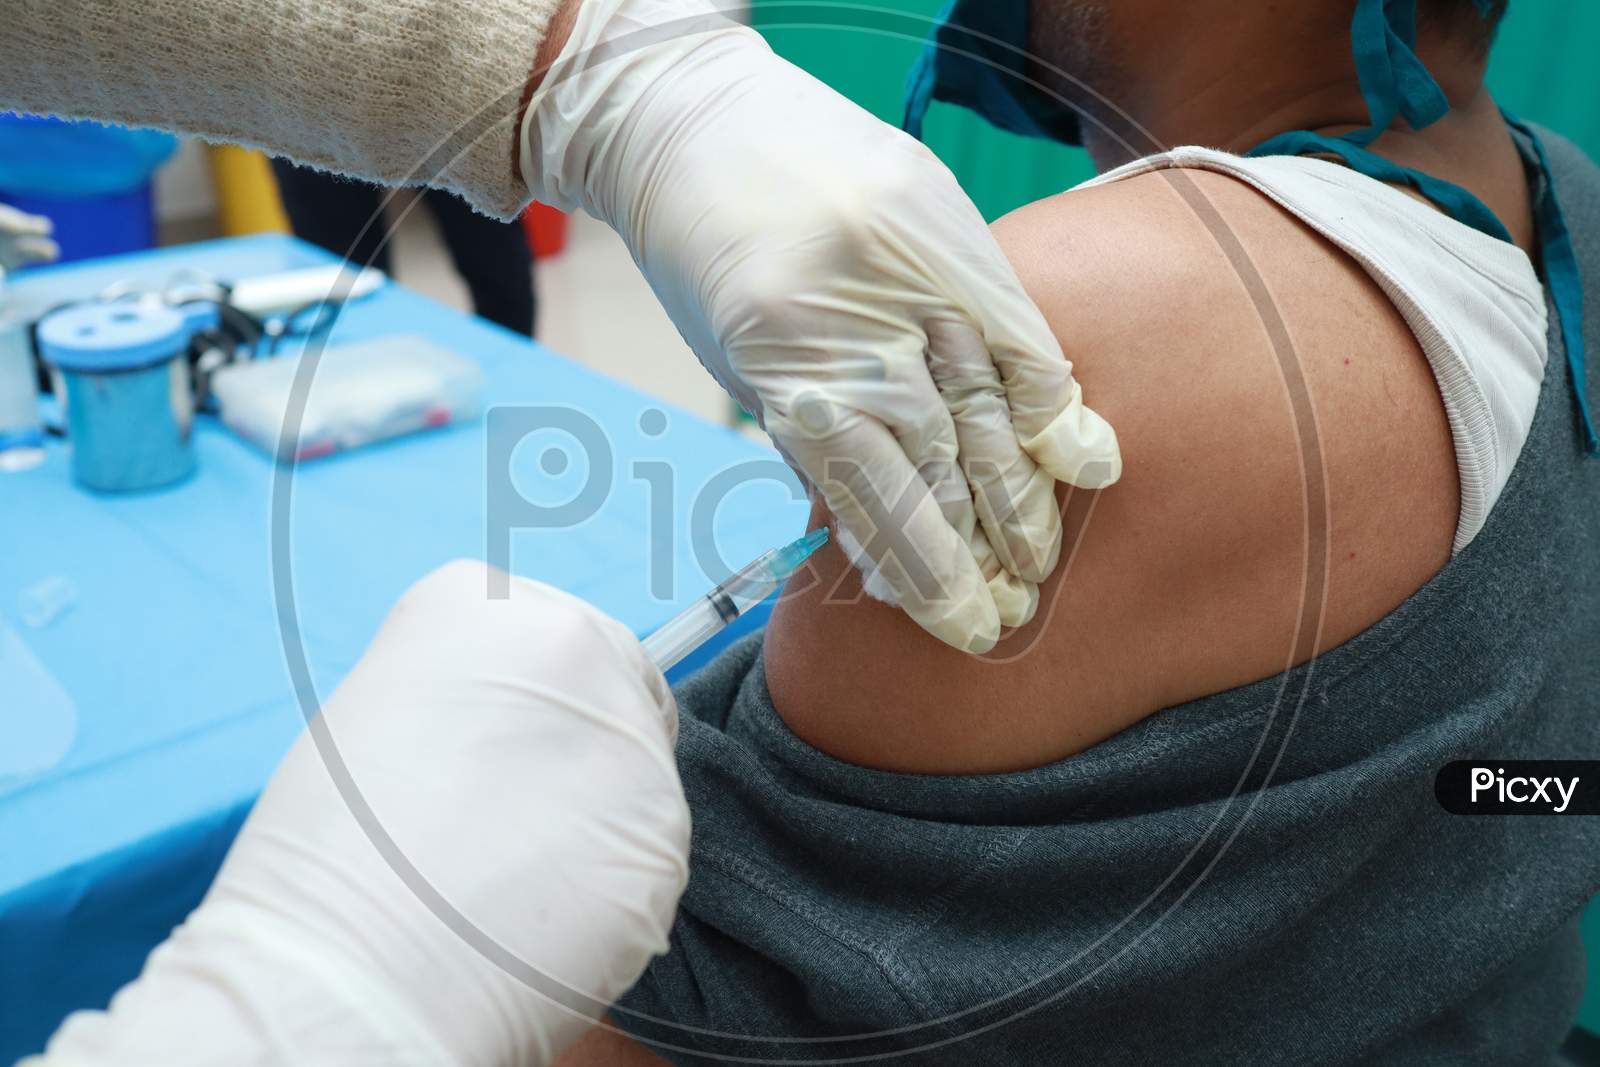 A Close Up Photo Of An Intra Muscular Covid Vaccine Being Given In Arm Of A Patient By A Doctor With Gloved Hand With Selective Focus On Arm